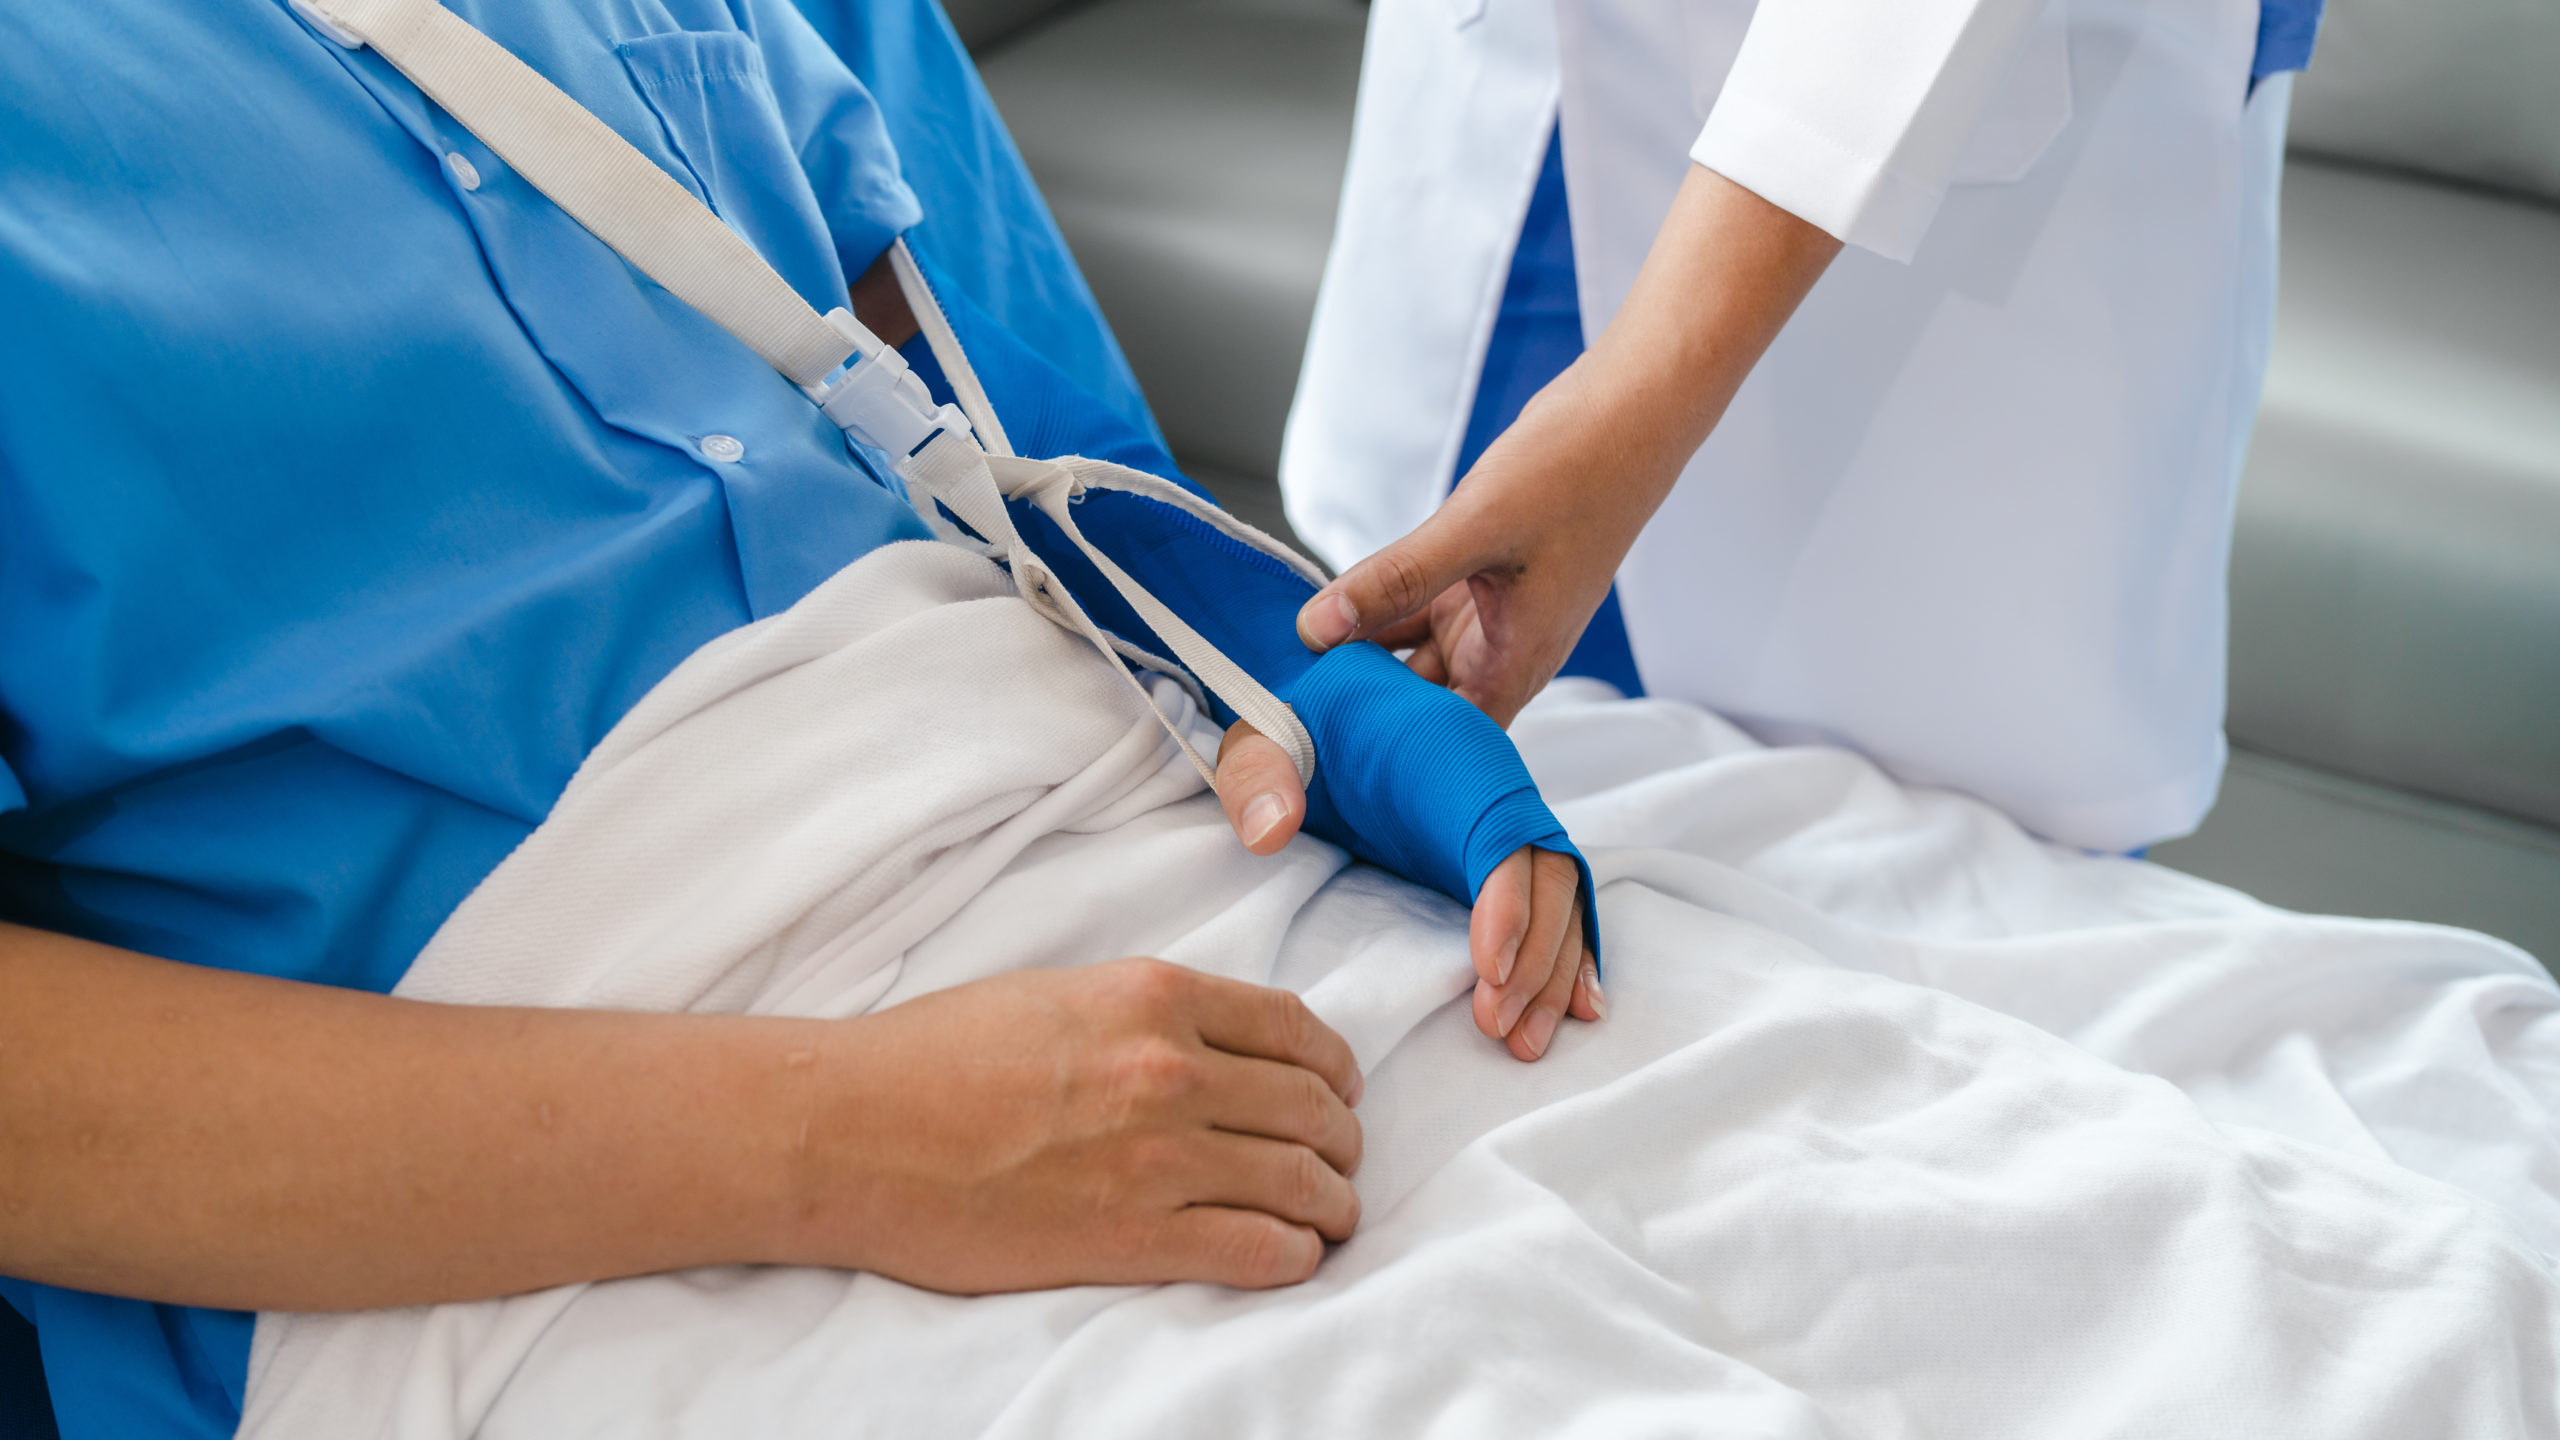 A person lies in a hospital bed with a blue sling supporting their right arm, highlighting the importance of proper auto injury treatment. A healthcare professional adjusts the sling, ensuring correct support. The patient wears a blue hospital gown and is covered with a white blanket, illustrating fact vs. myth in recovery care.